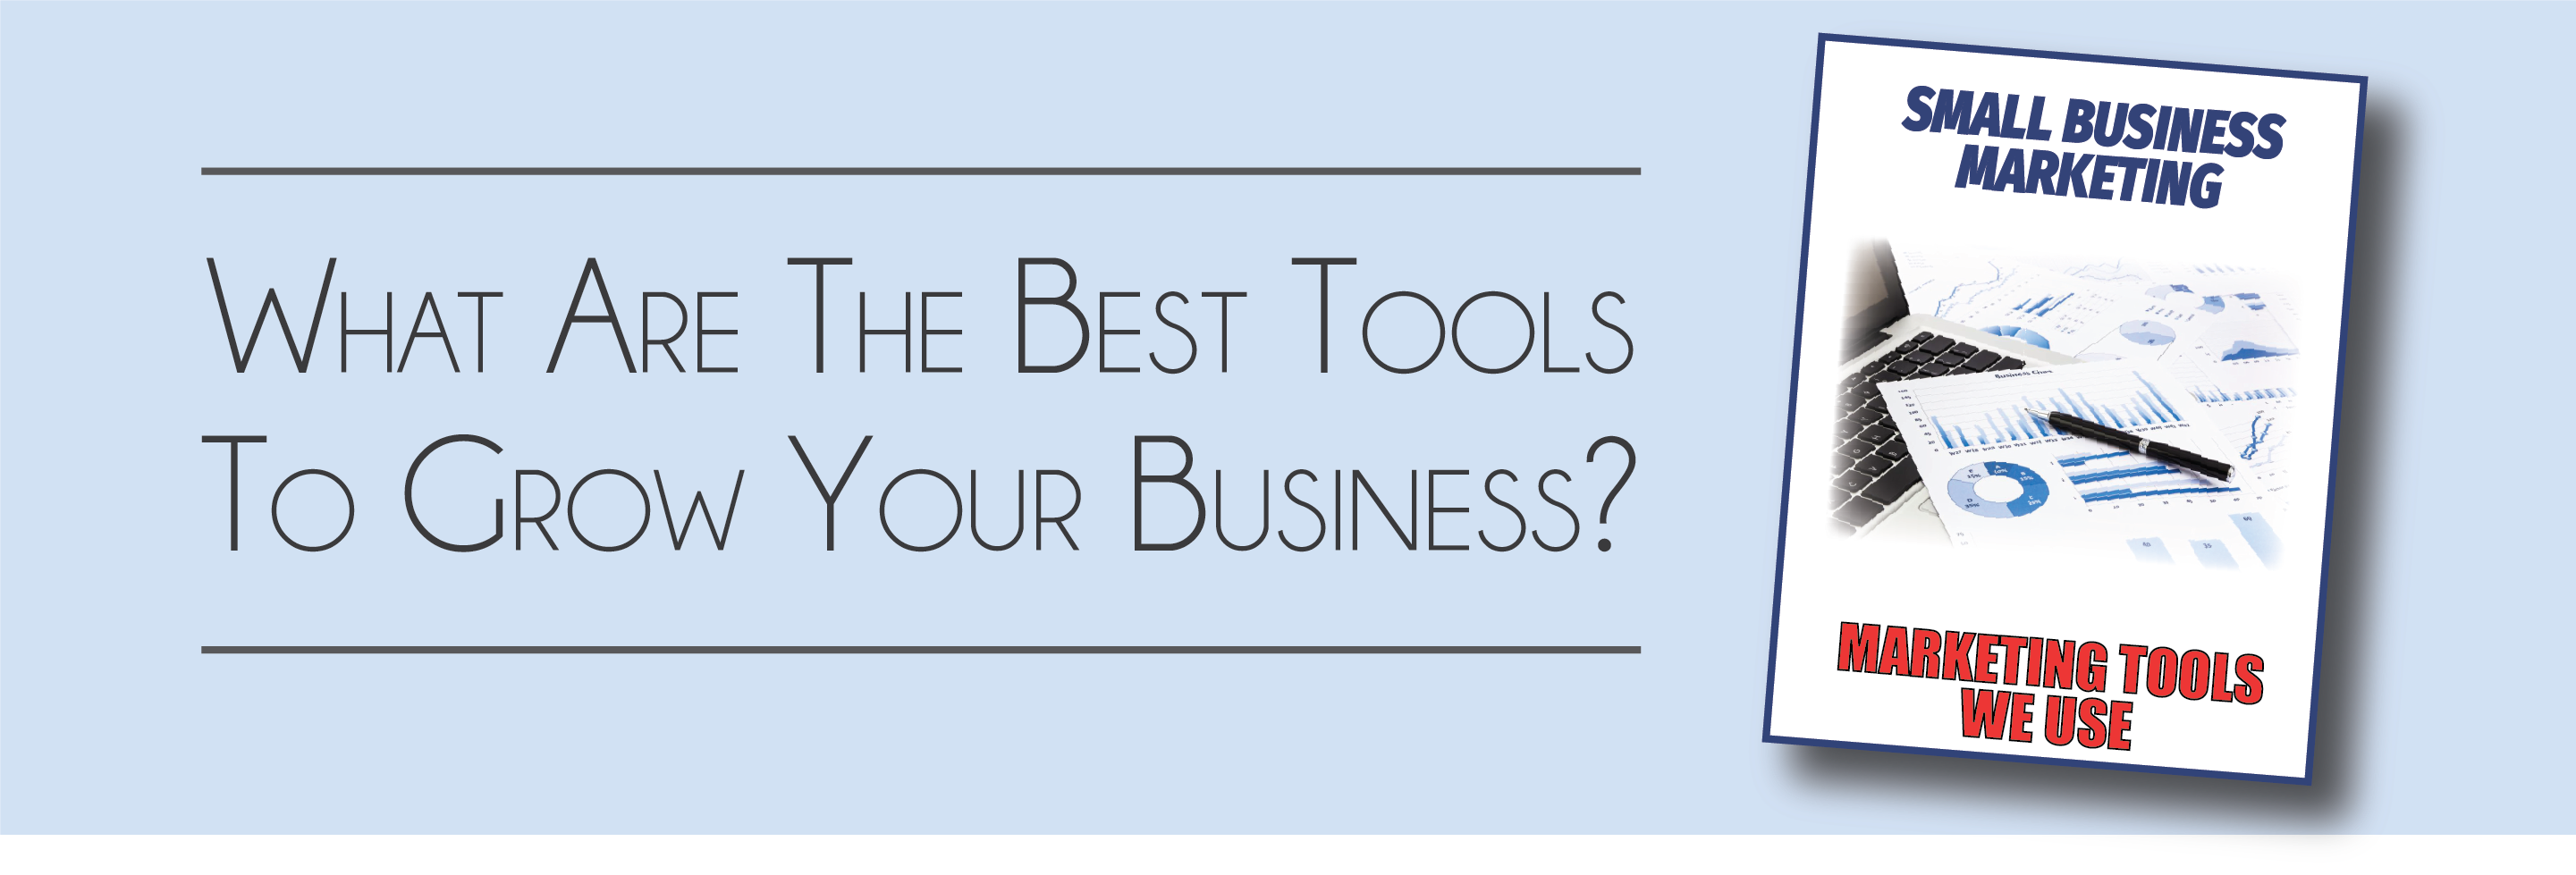 marketing tools to grow business